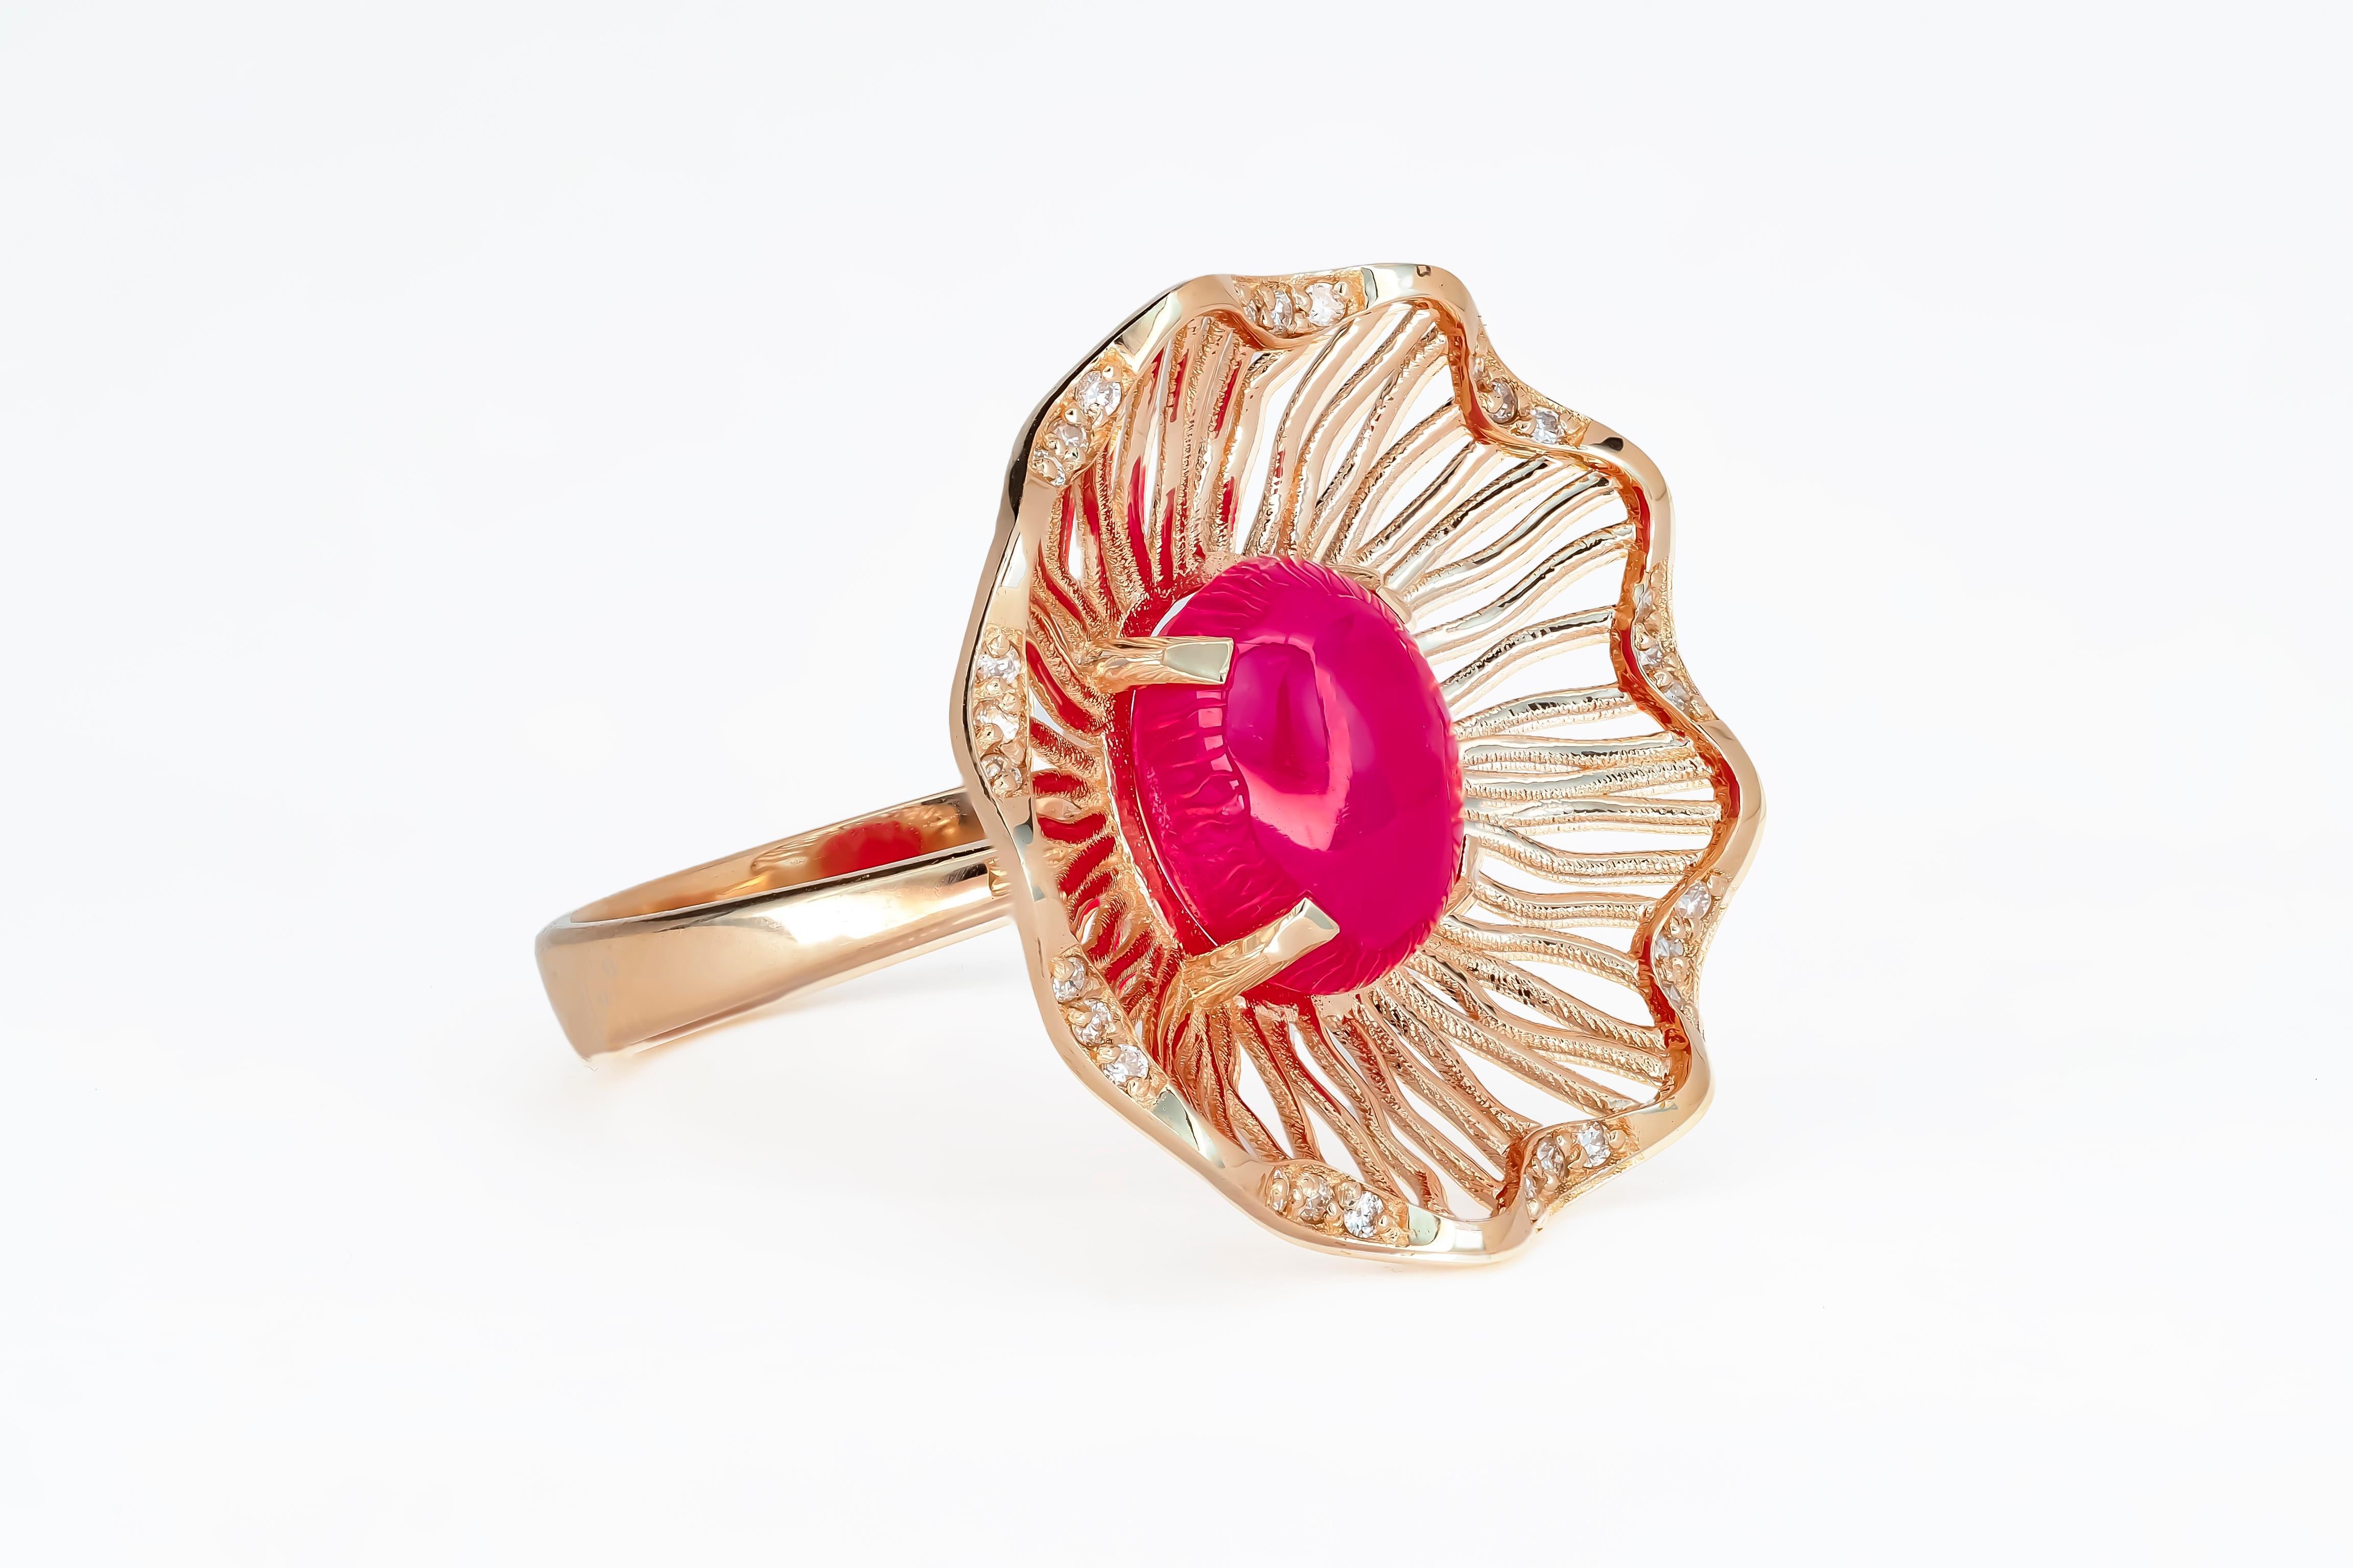 Modern Pink Gold Ring with Ruby and Diamonds, Vintage Style Ring with Ruby Cabochon